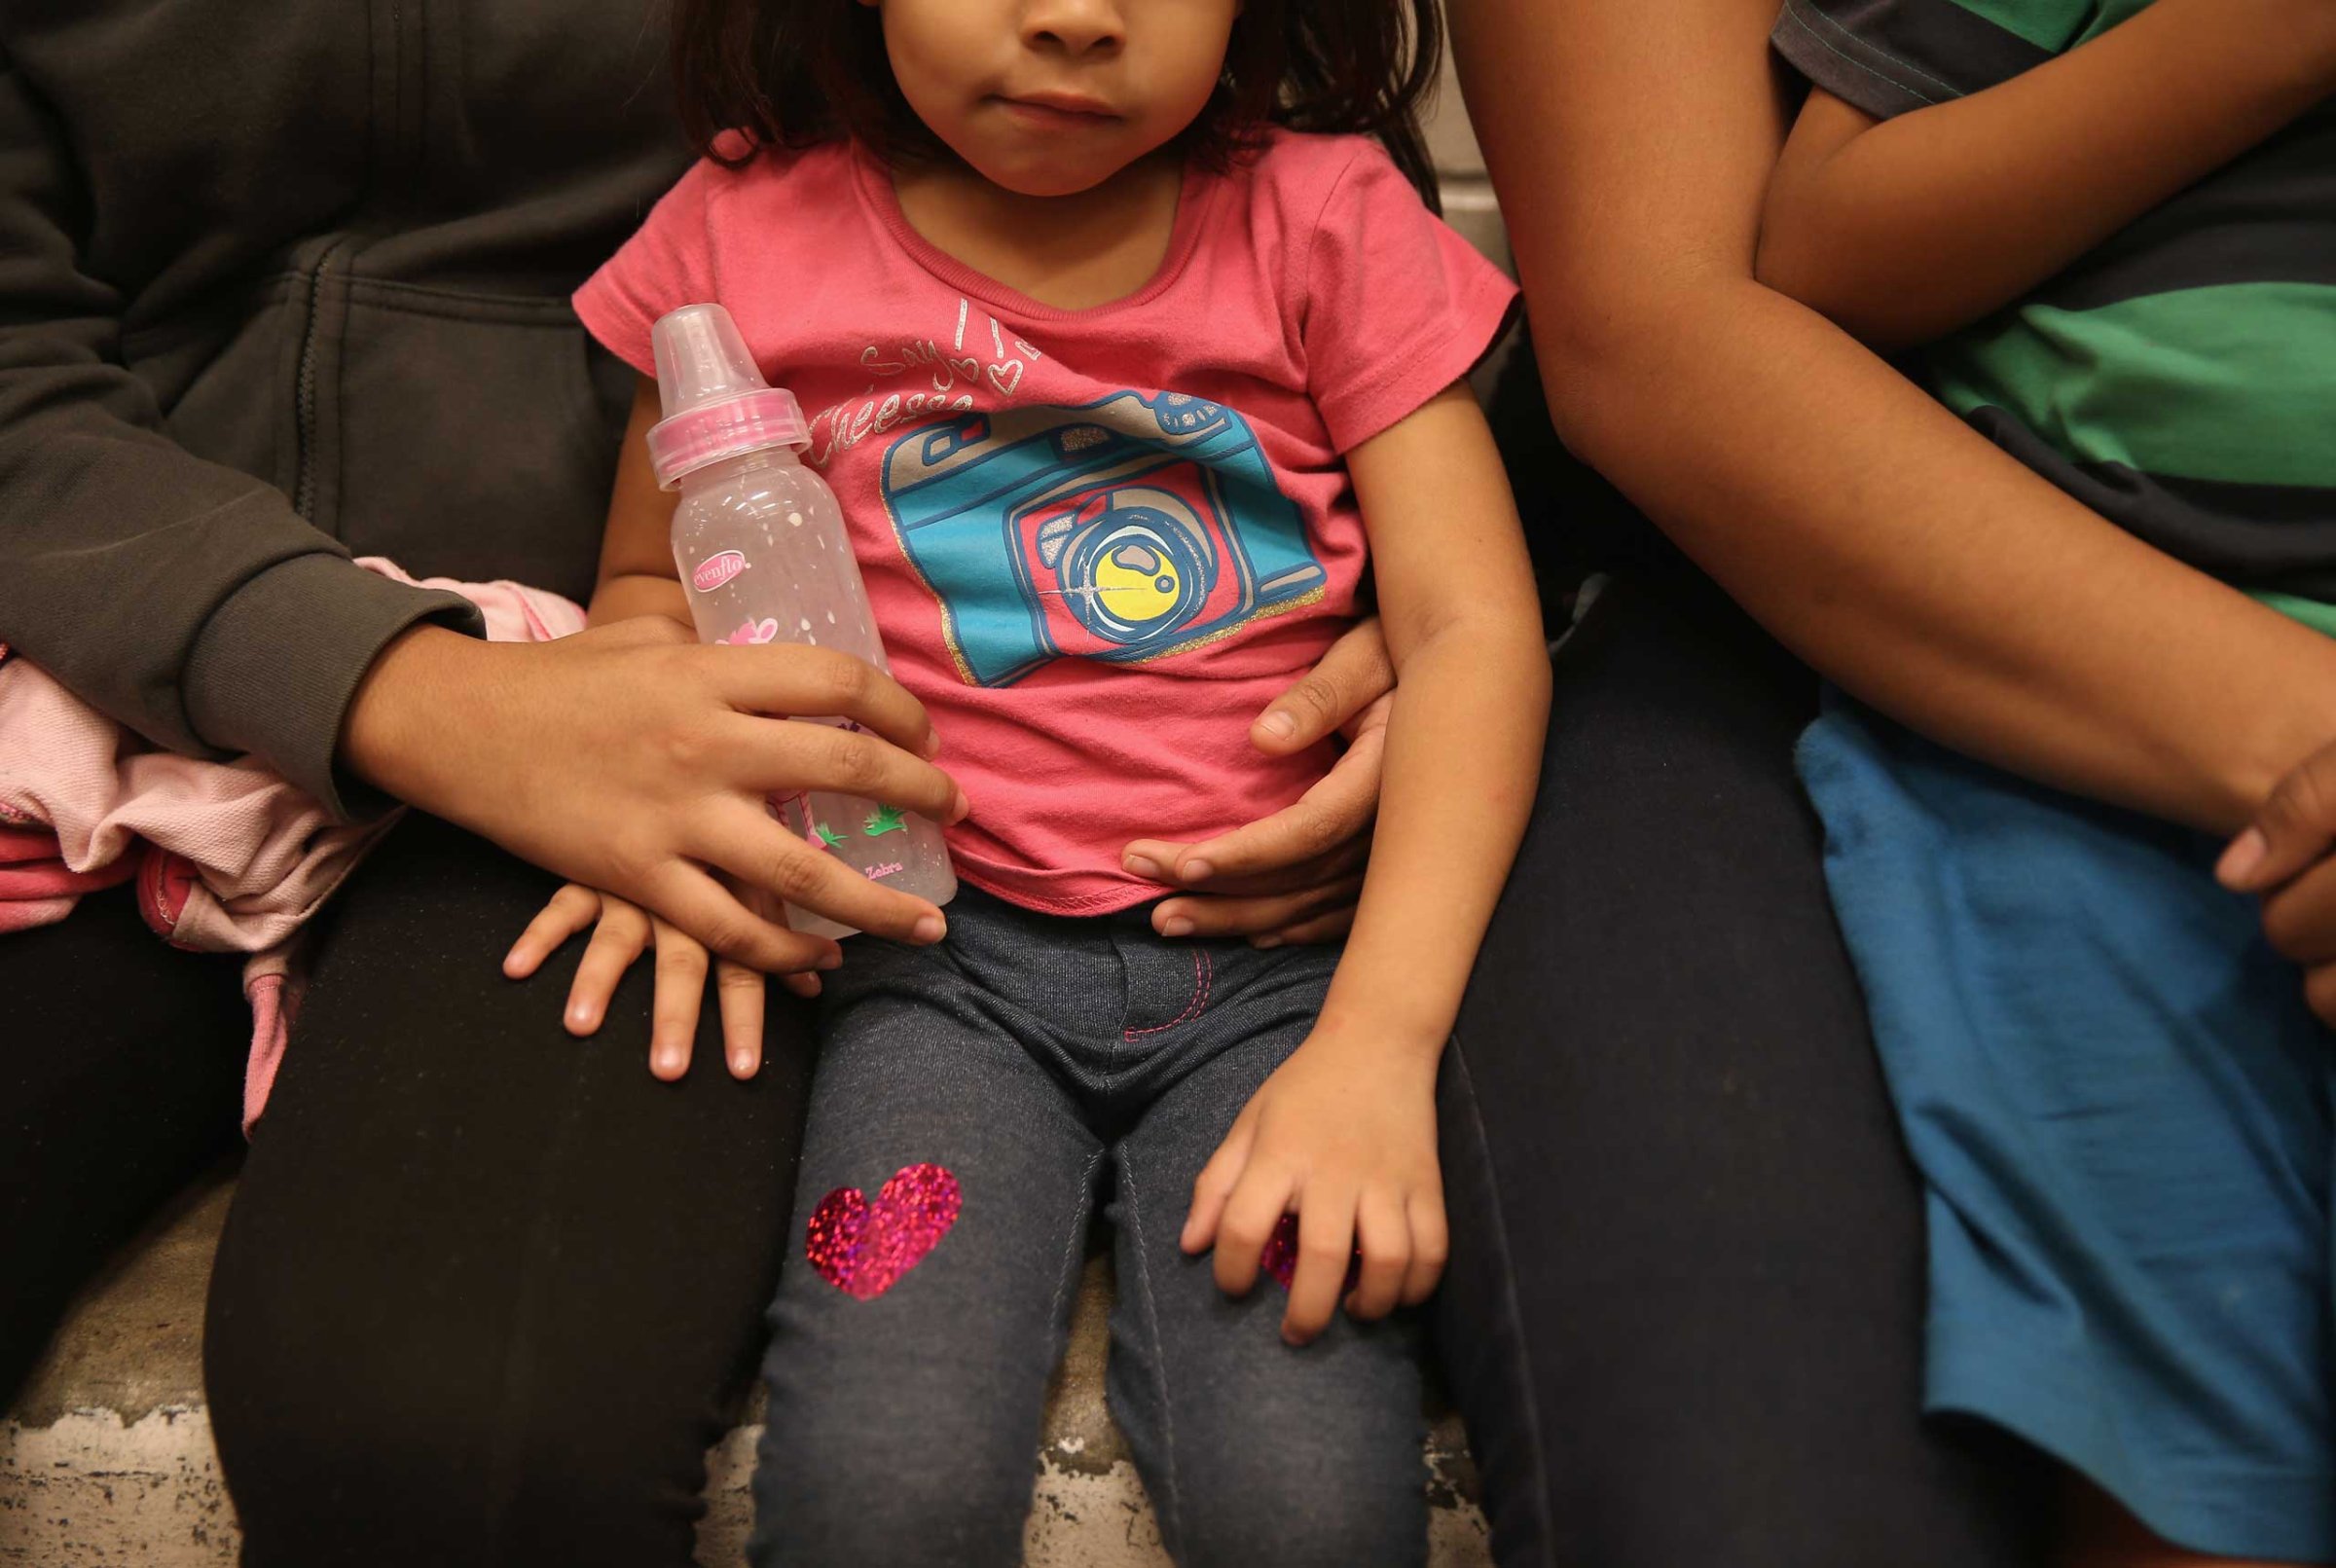 Women and children sit in a holding cell at a U.S. Border Patrol processing center after being detained by agents near the U.S.-Mexico border on Sept. 8, 2014 near McAllen, Texas.